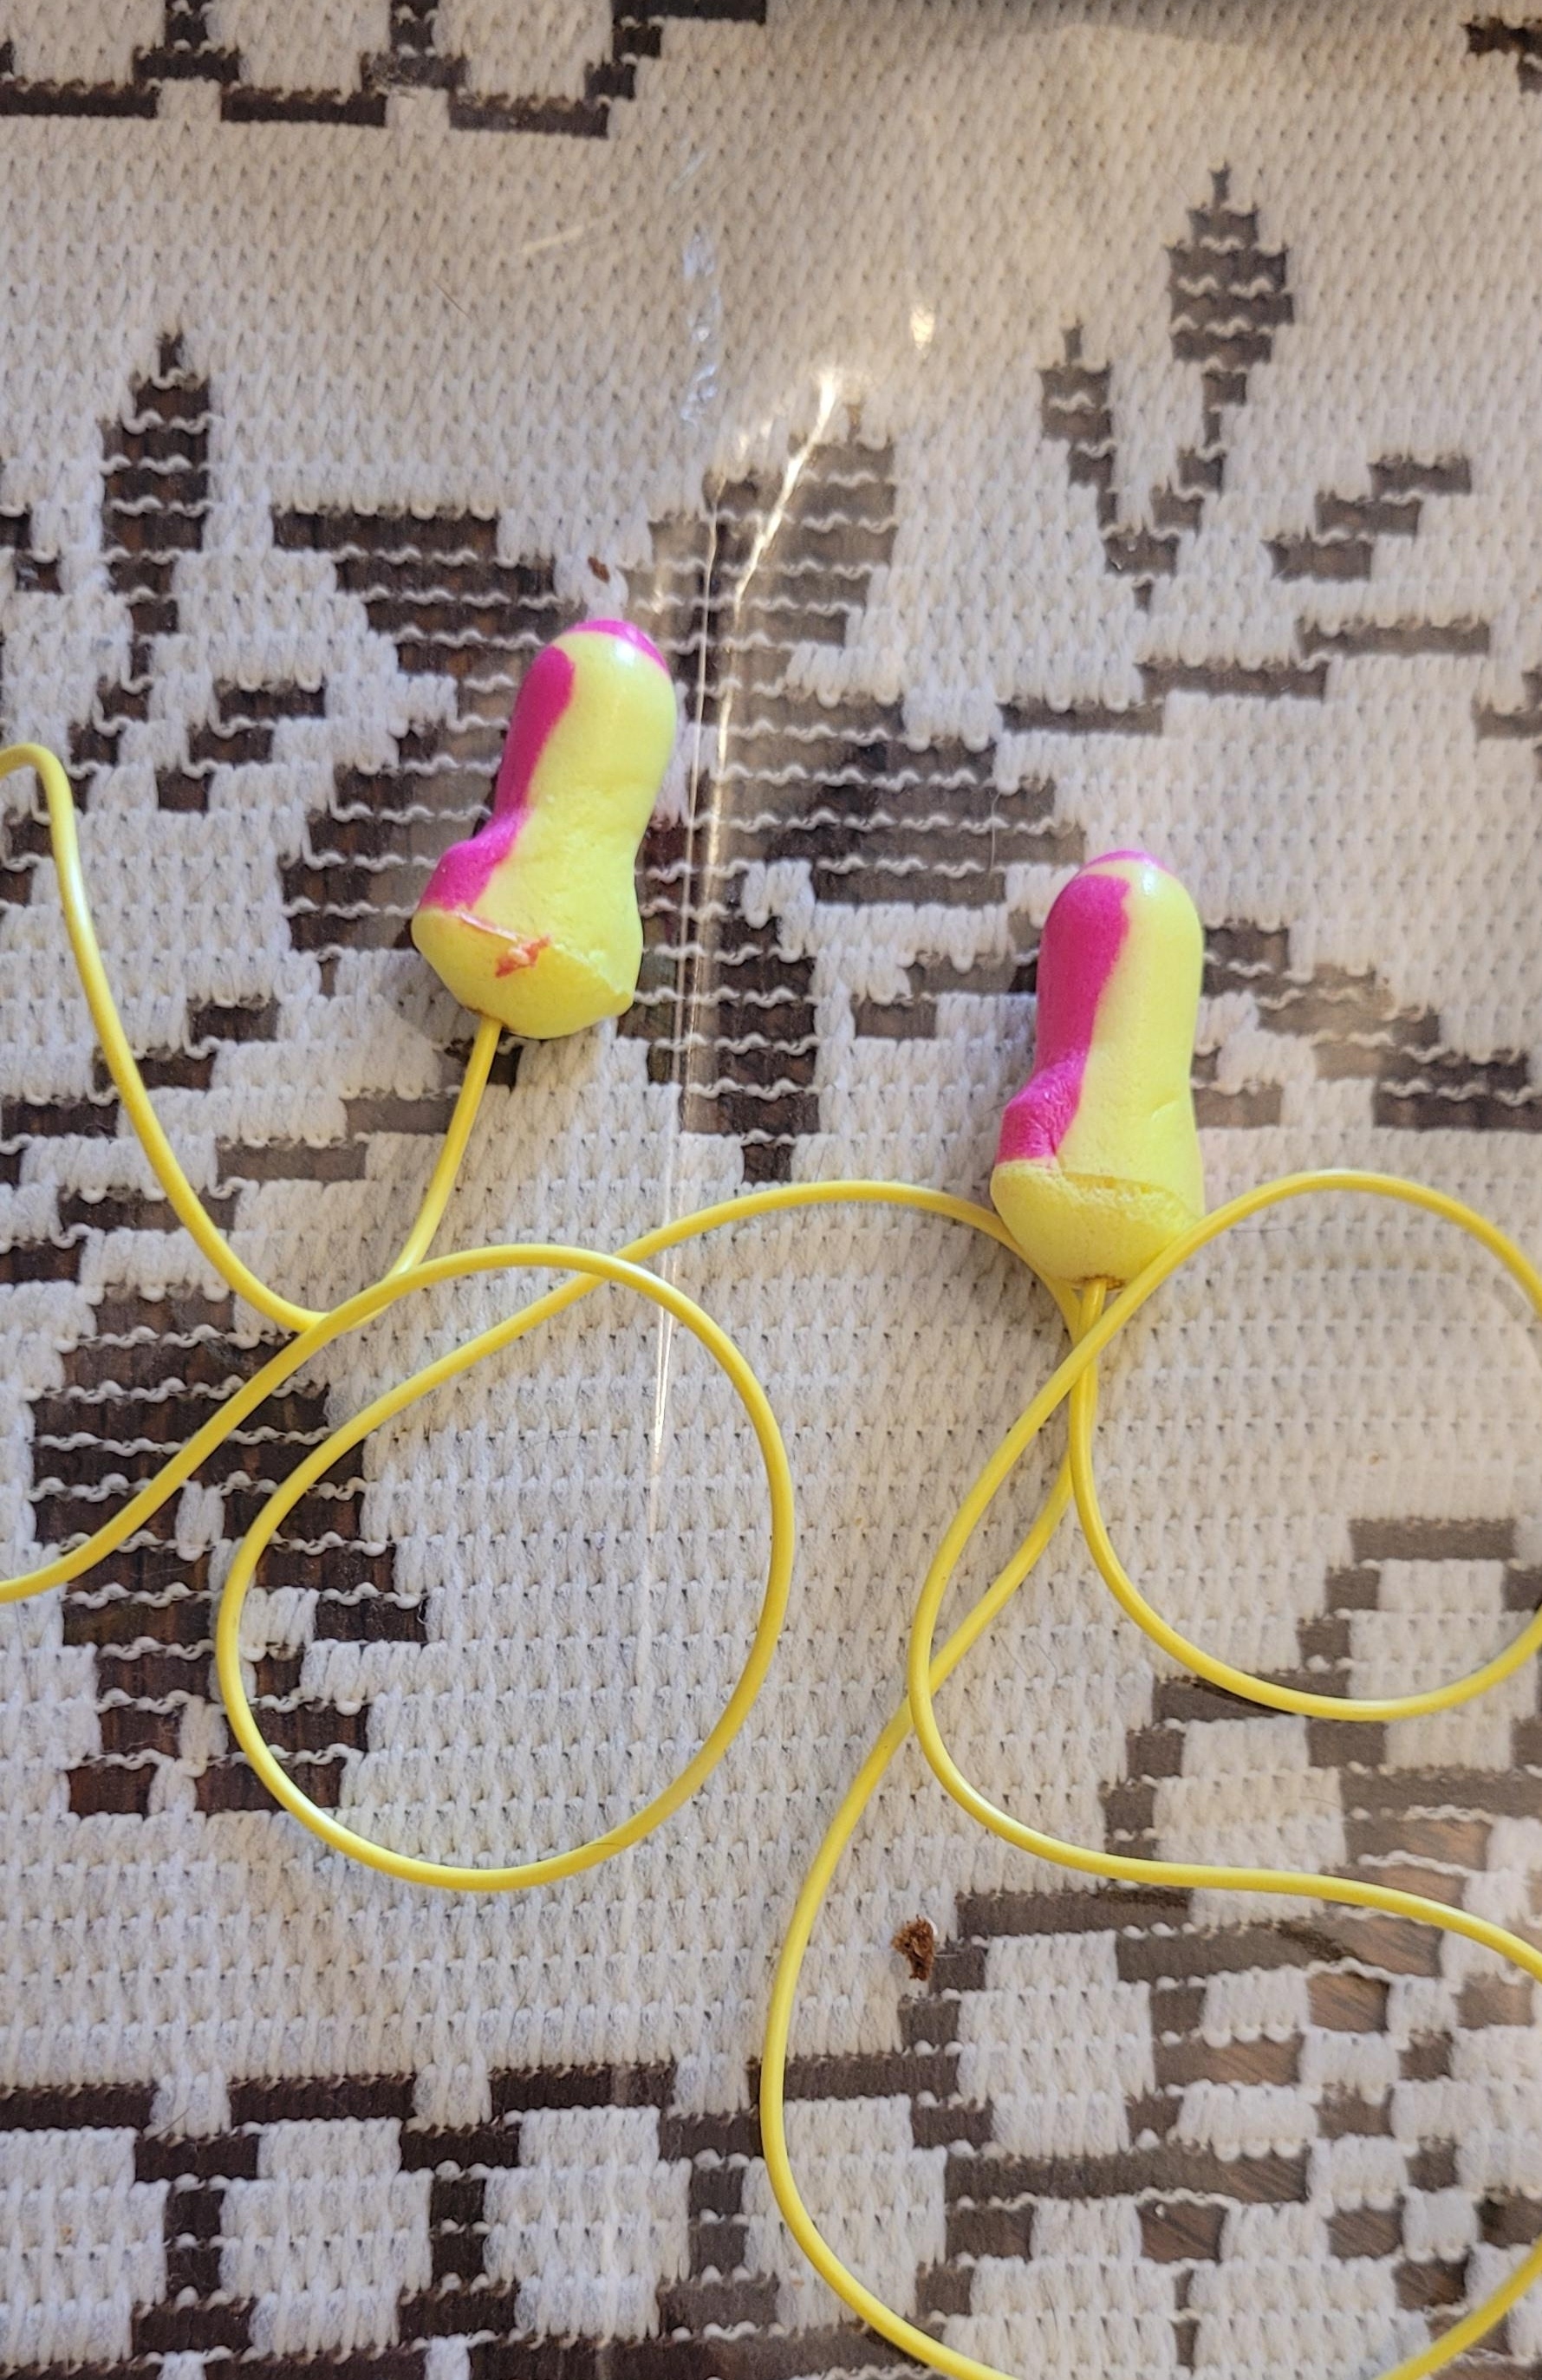 Pink-and-yellow earplugs connected with a yellow rope